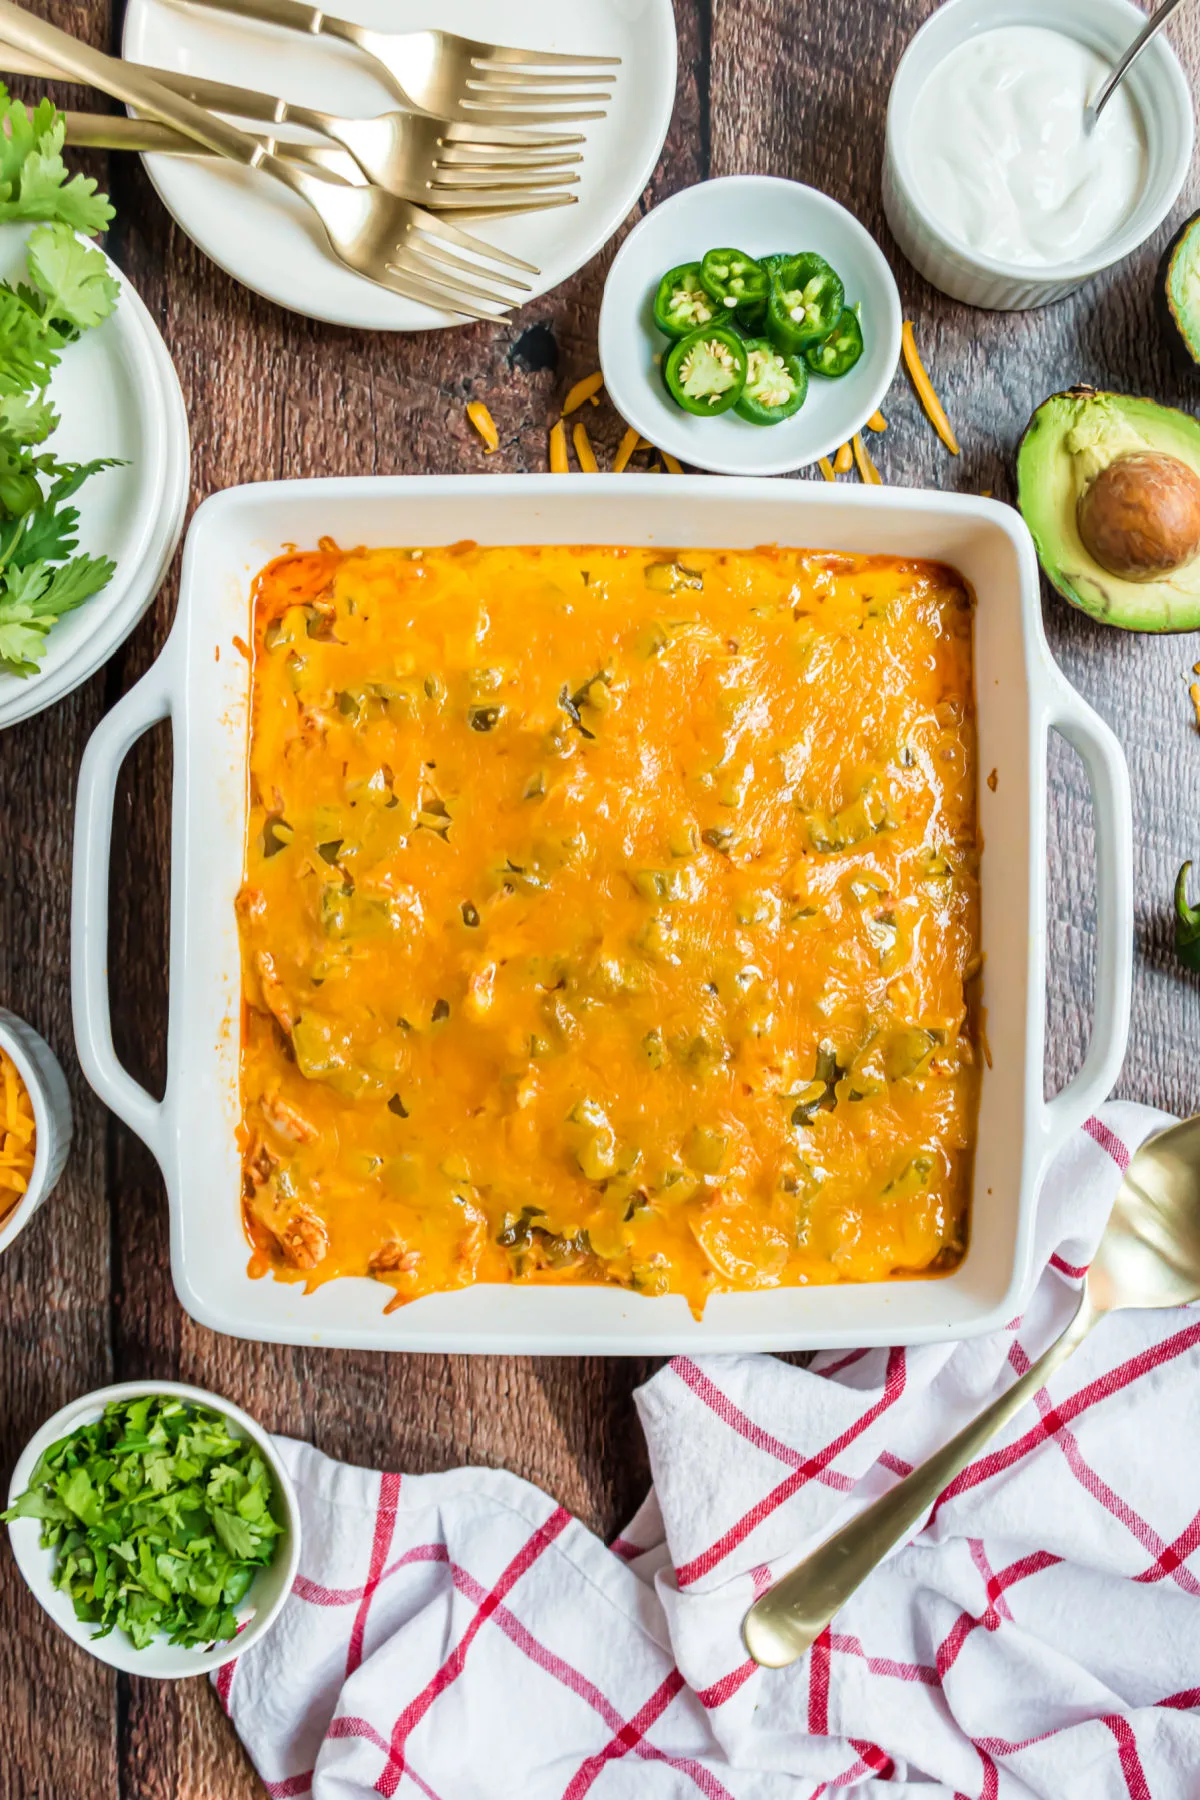 Enchilada casserole baked in a square dish served with jalapenos and sour cream.